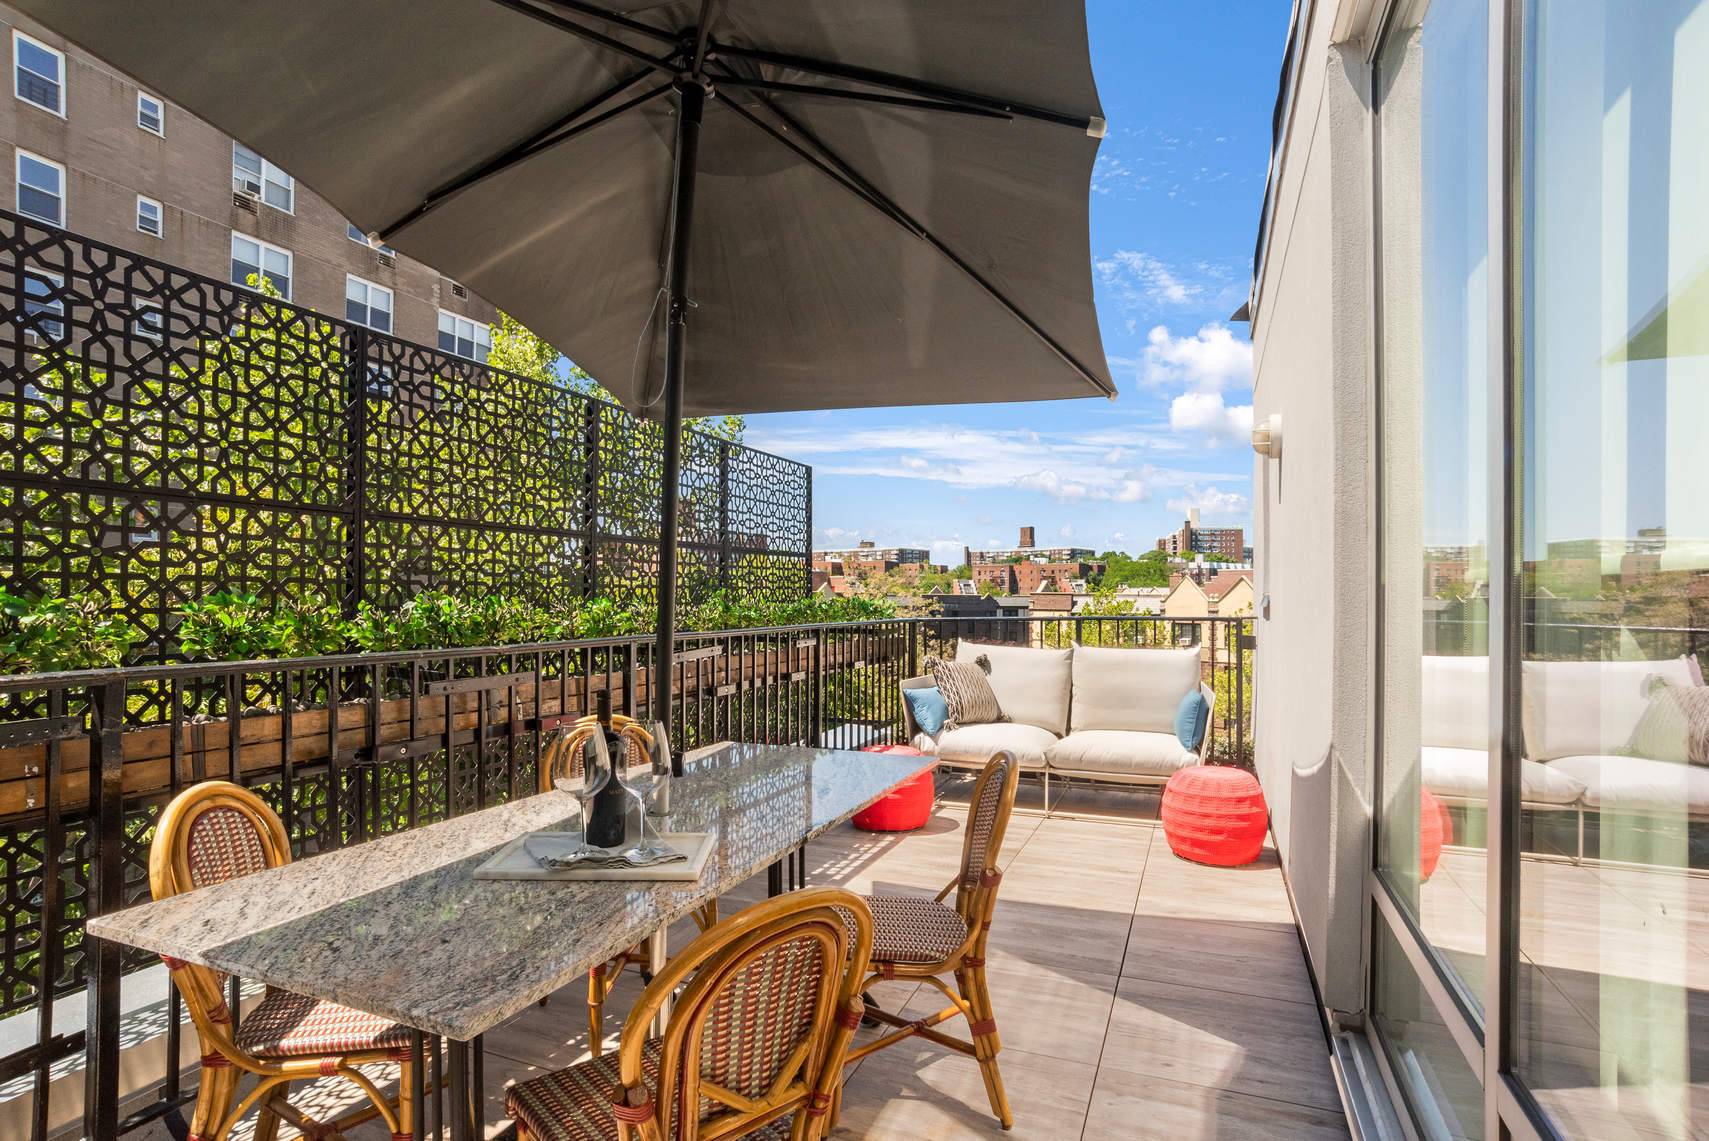 3751 Riverdale Avenue, 7B A spacious penthouse boasting a private terrace and chic finishes, this sun drenched 3 bedroom, 2.